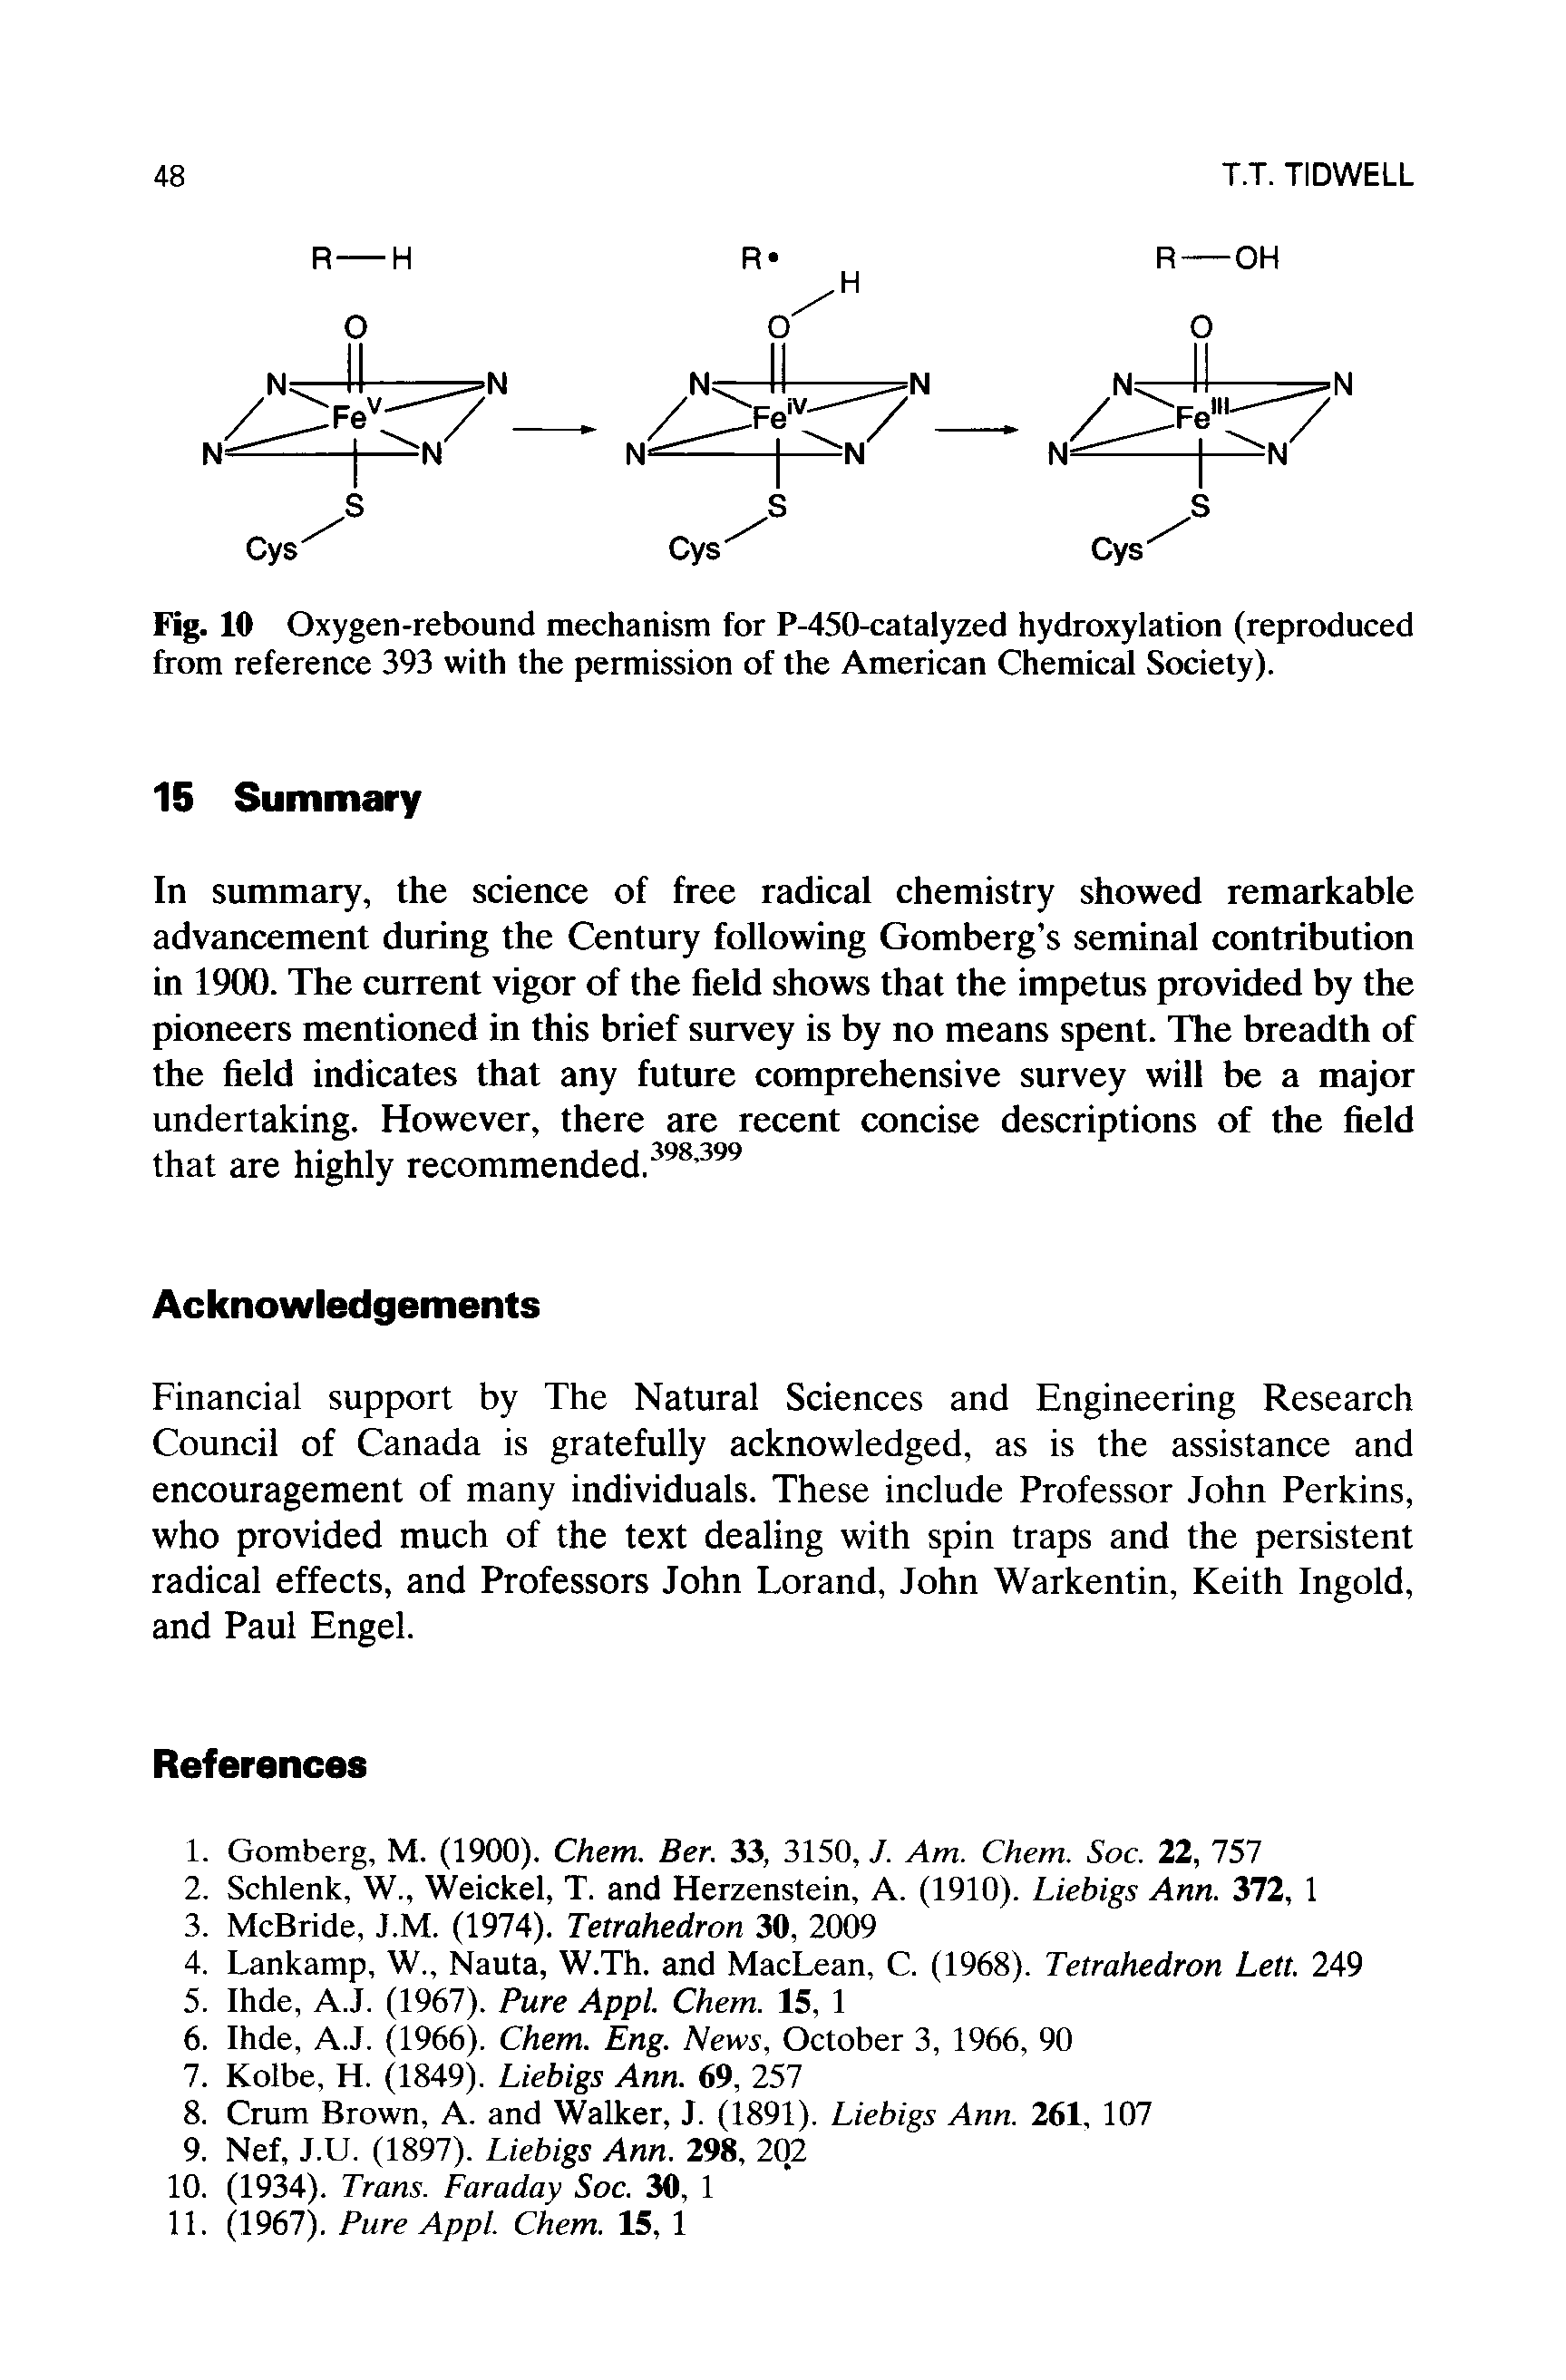 Fig. 10 Oxygen-rebound mechanism for P-450-catalyzed hydroxylation (reproduced from reference 393 with the permission of the American Chemical Society).